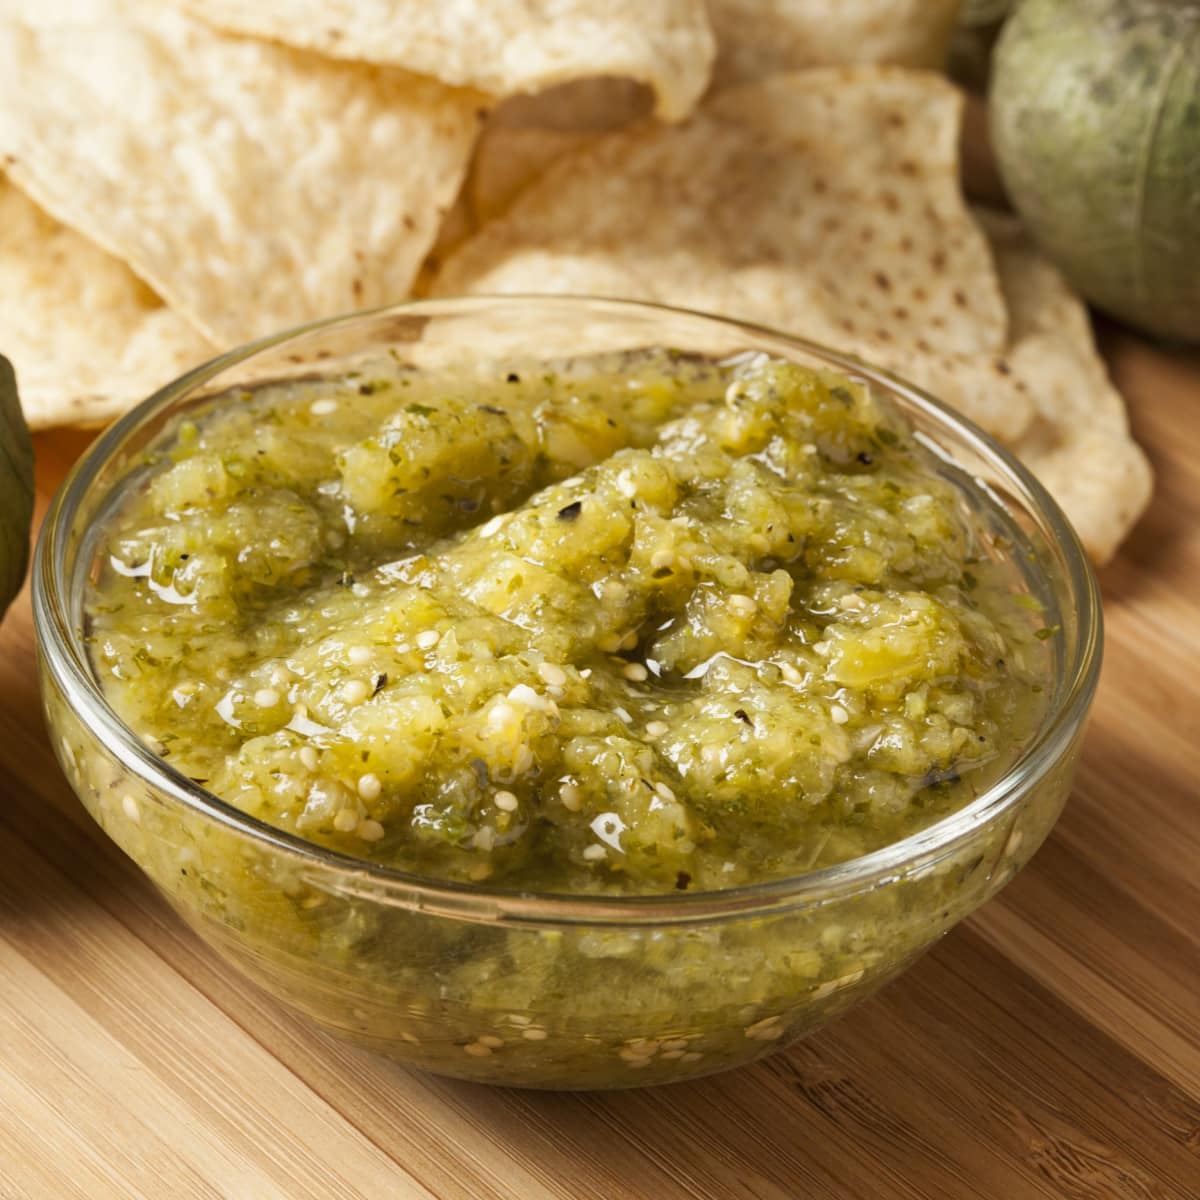 A Bowl of Homemade Salsa Verde on a Wooden Table